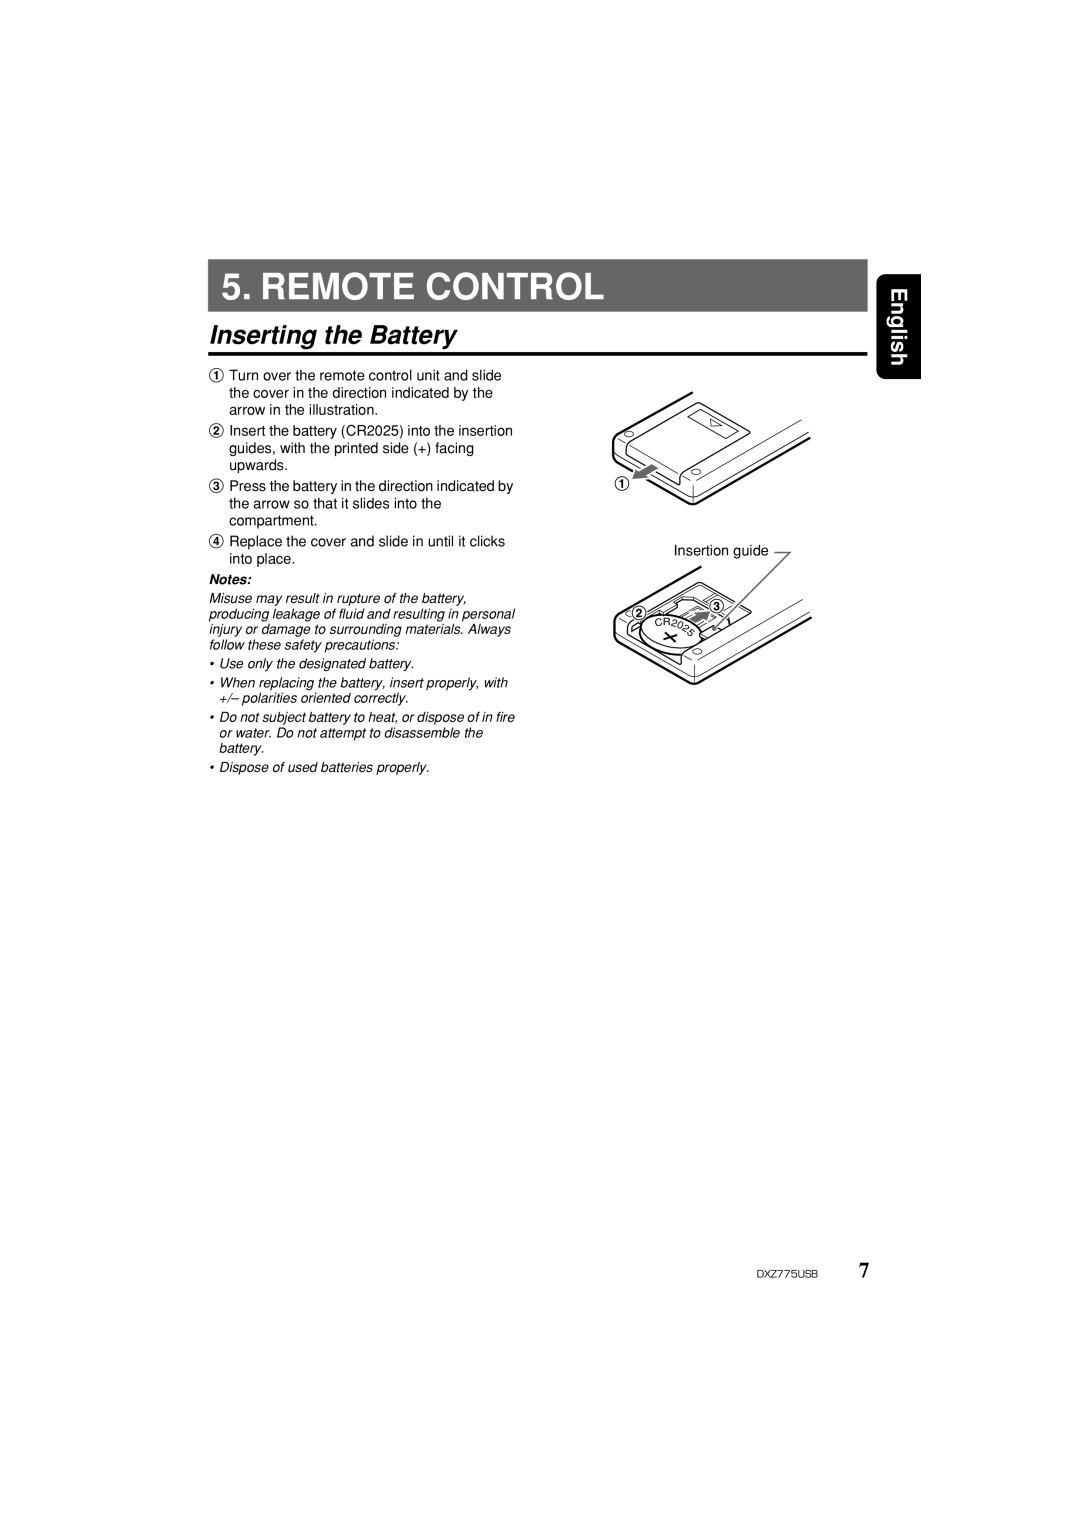 Clarion iDXZ775USB owner manual Remote Control, Inserting the Battery, English 